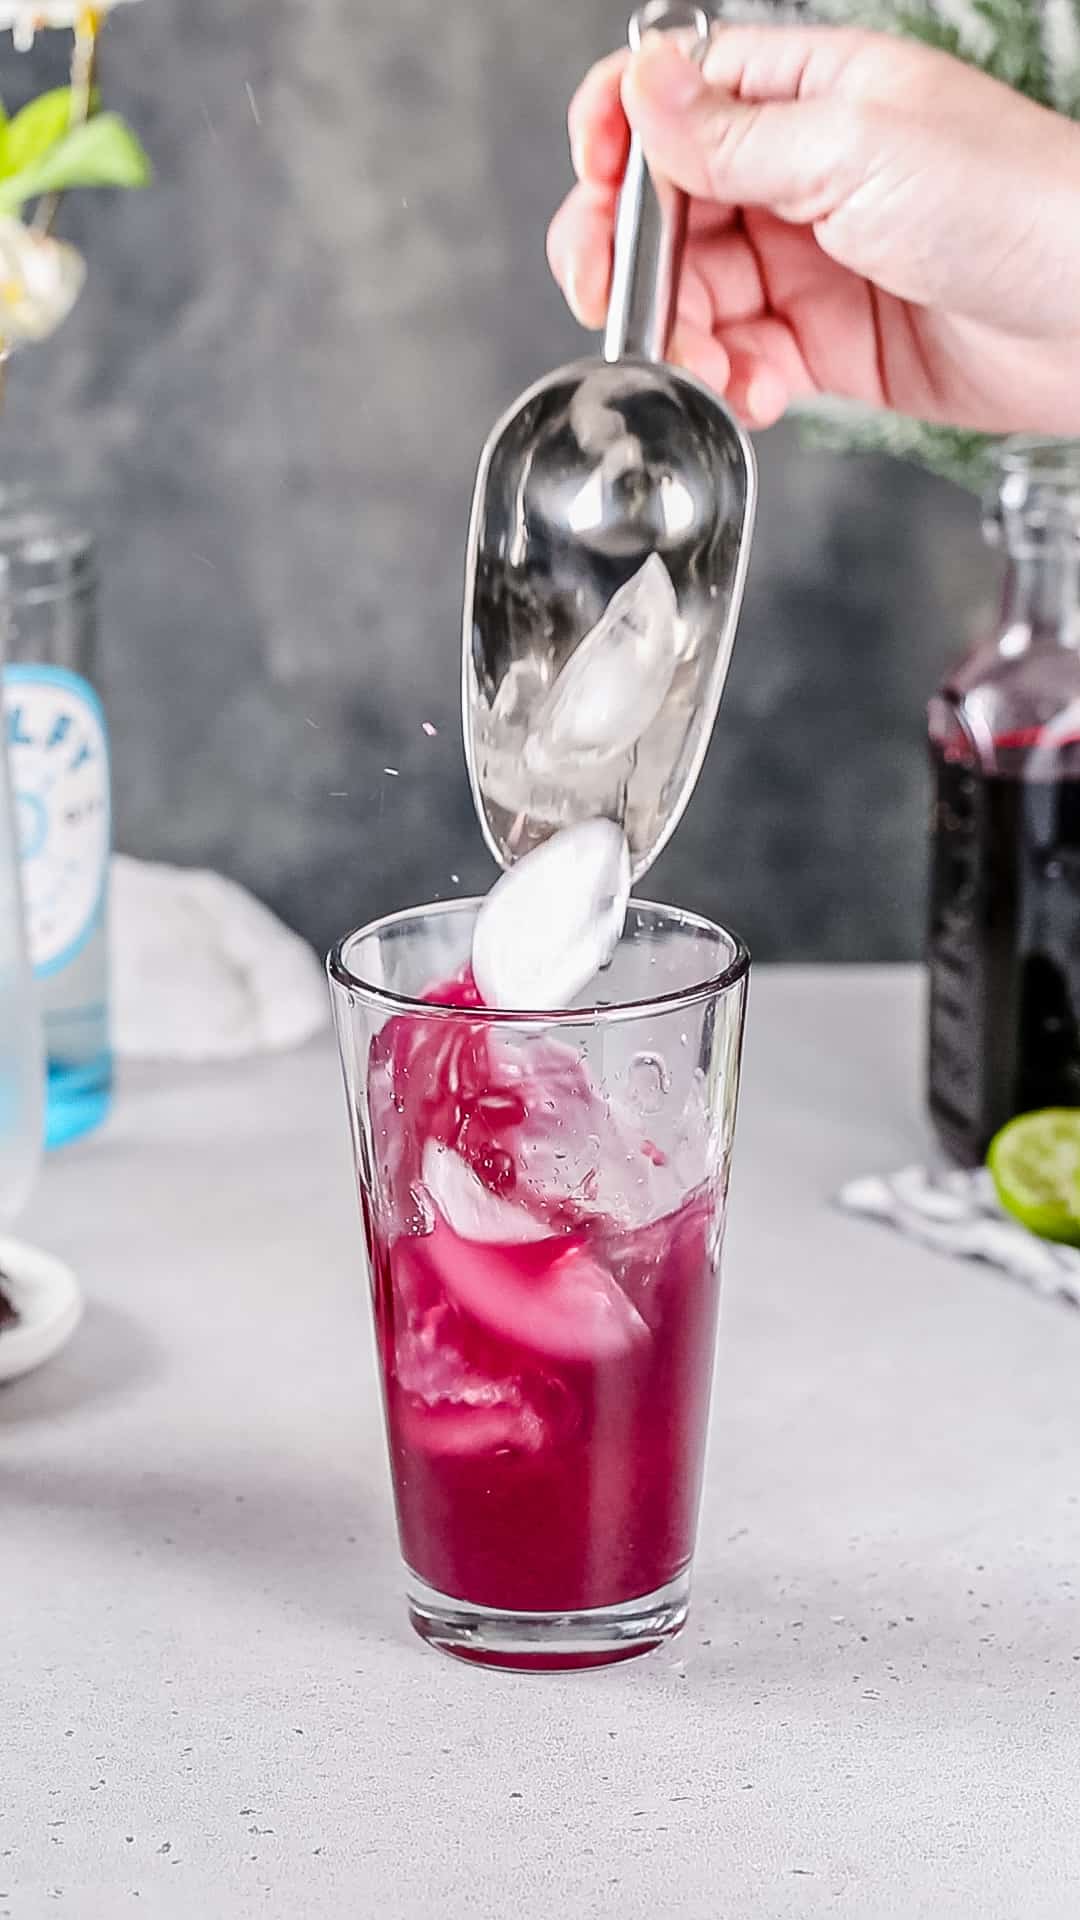 Adding ice to a dark pink cocktail in a glass cocktail shaker.